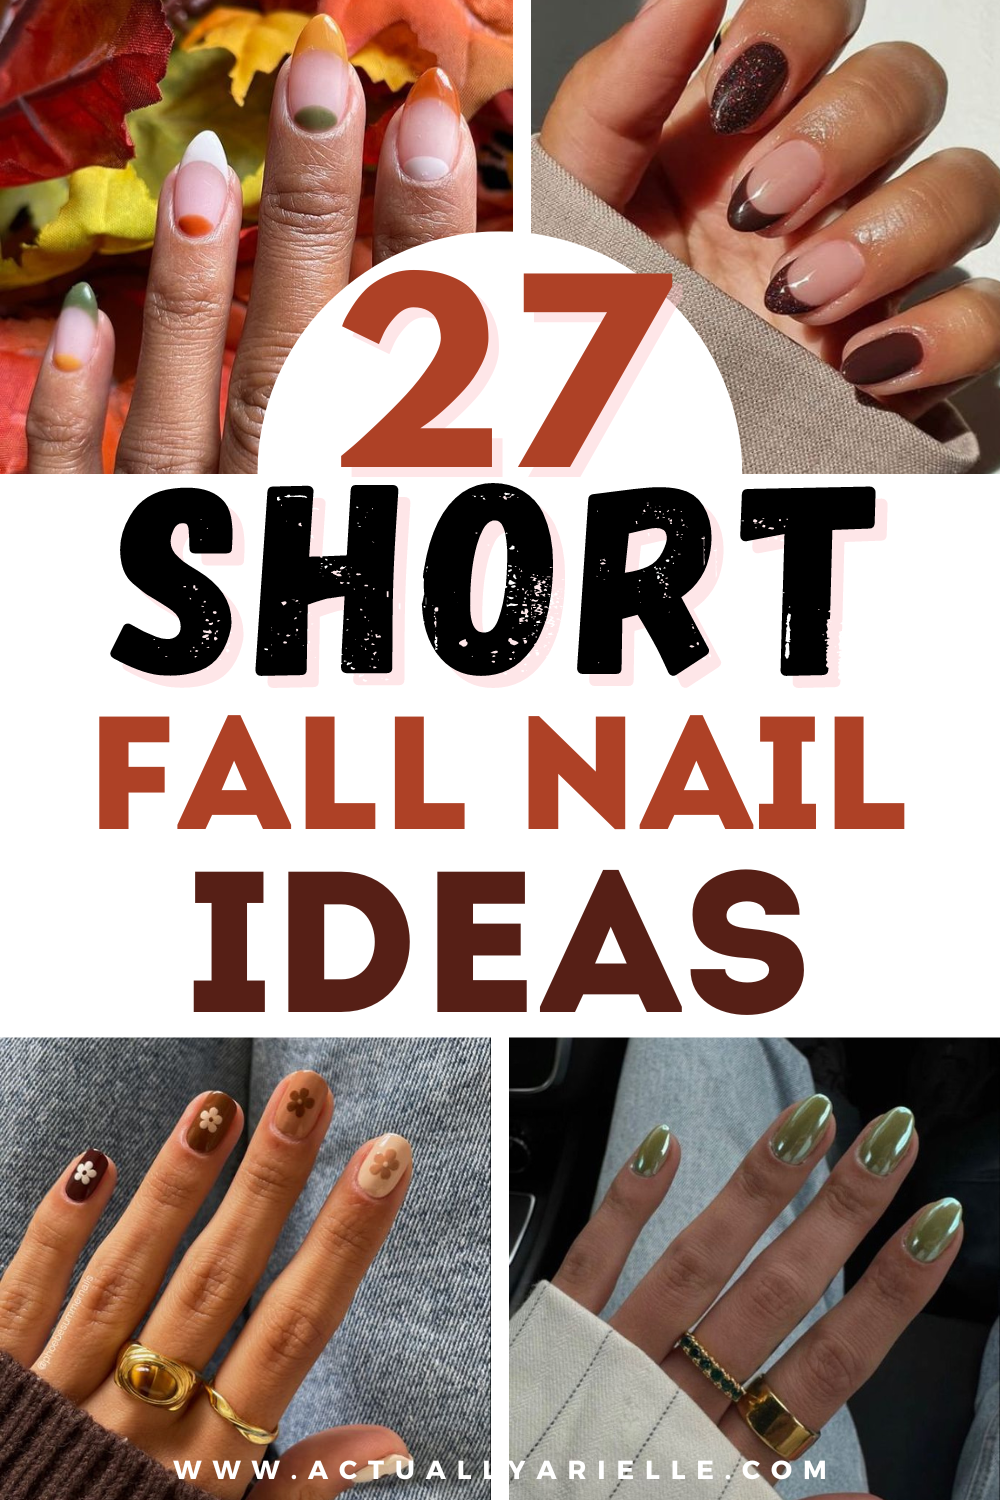 16 Cool Nail Designs for Short Tips